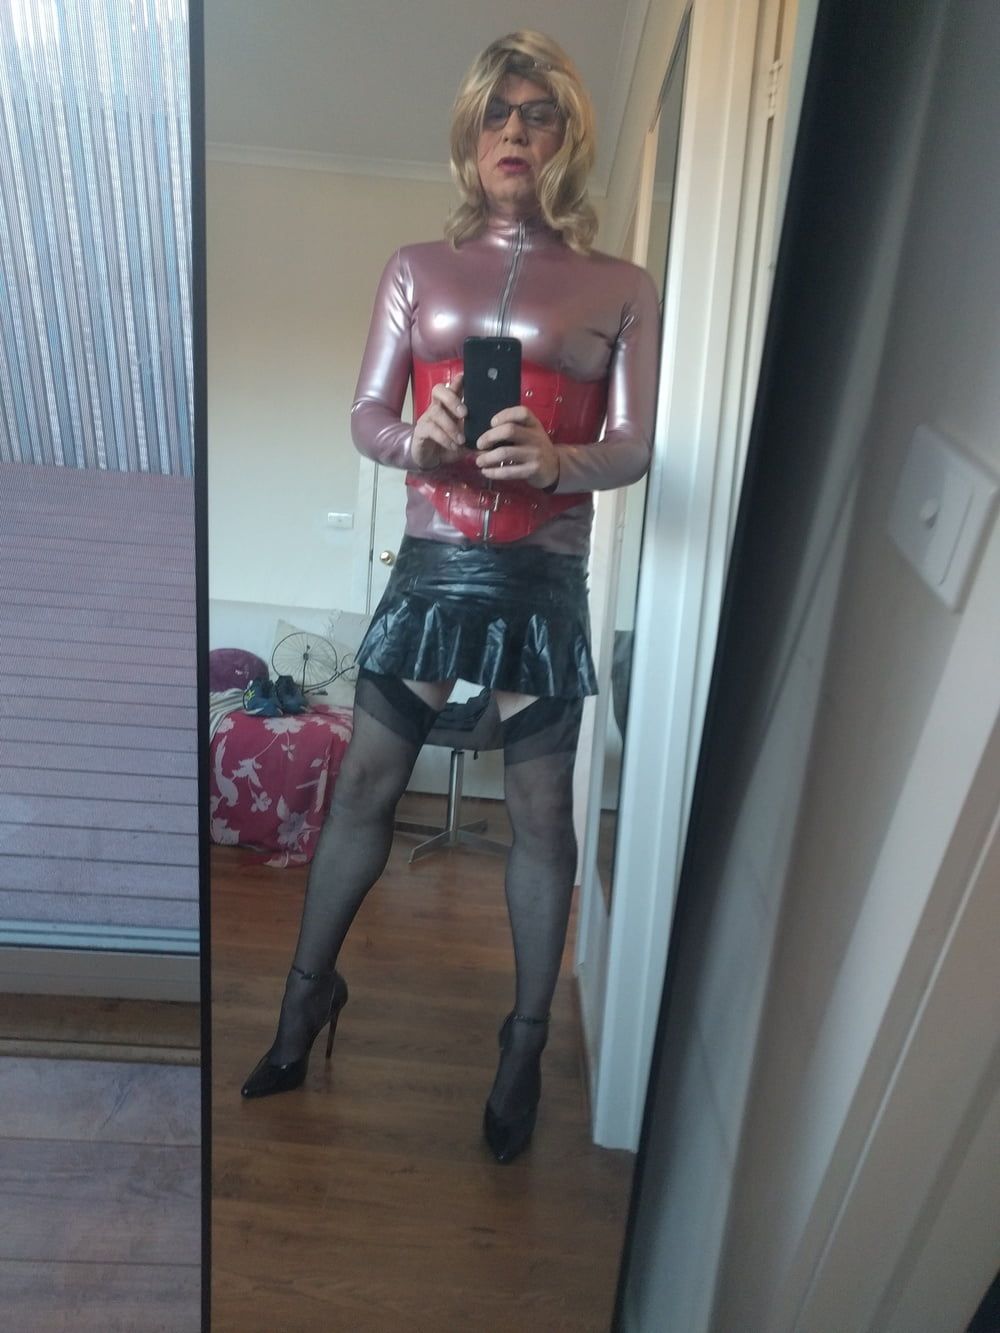 Back as a short blonde latex girl #2